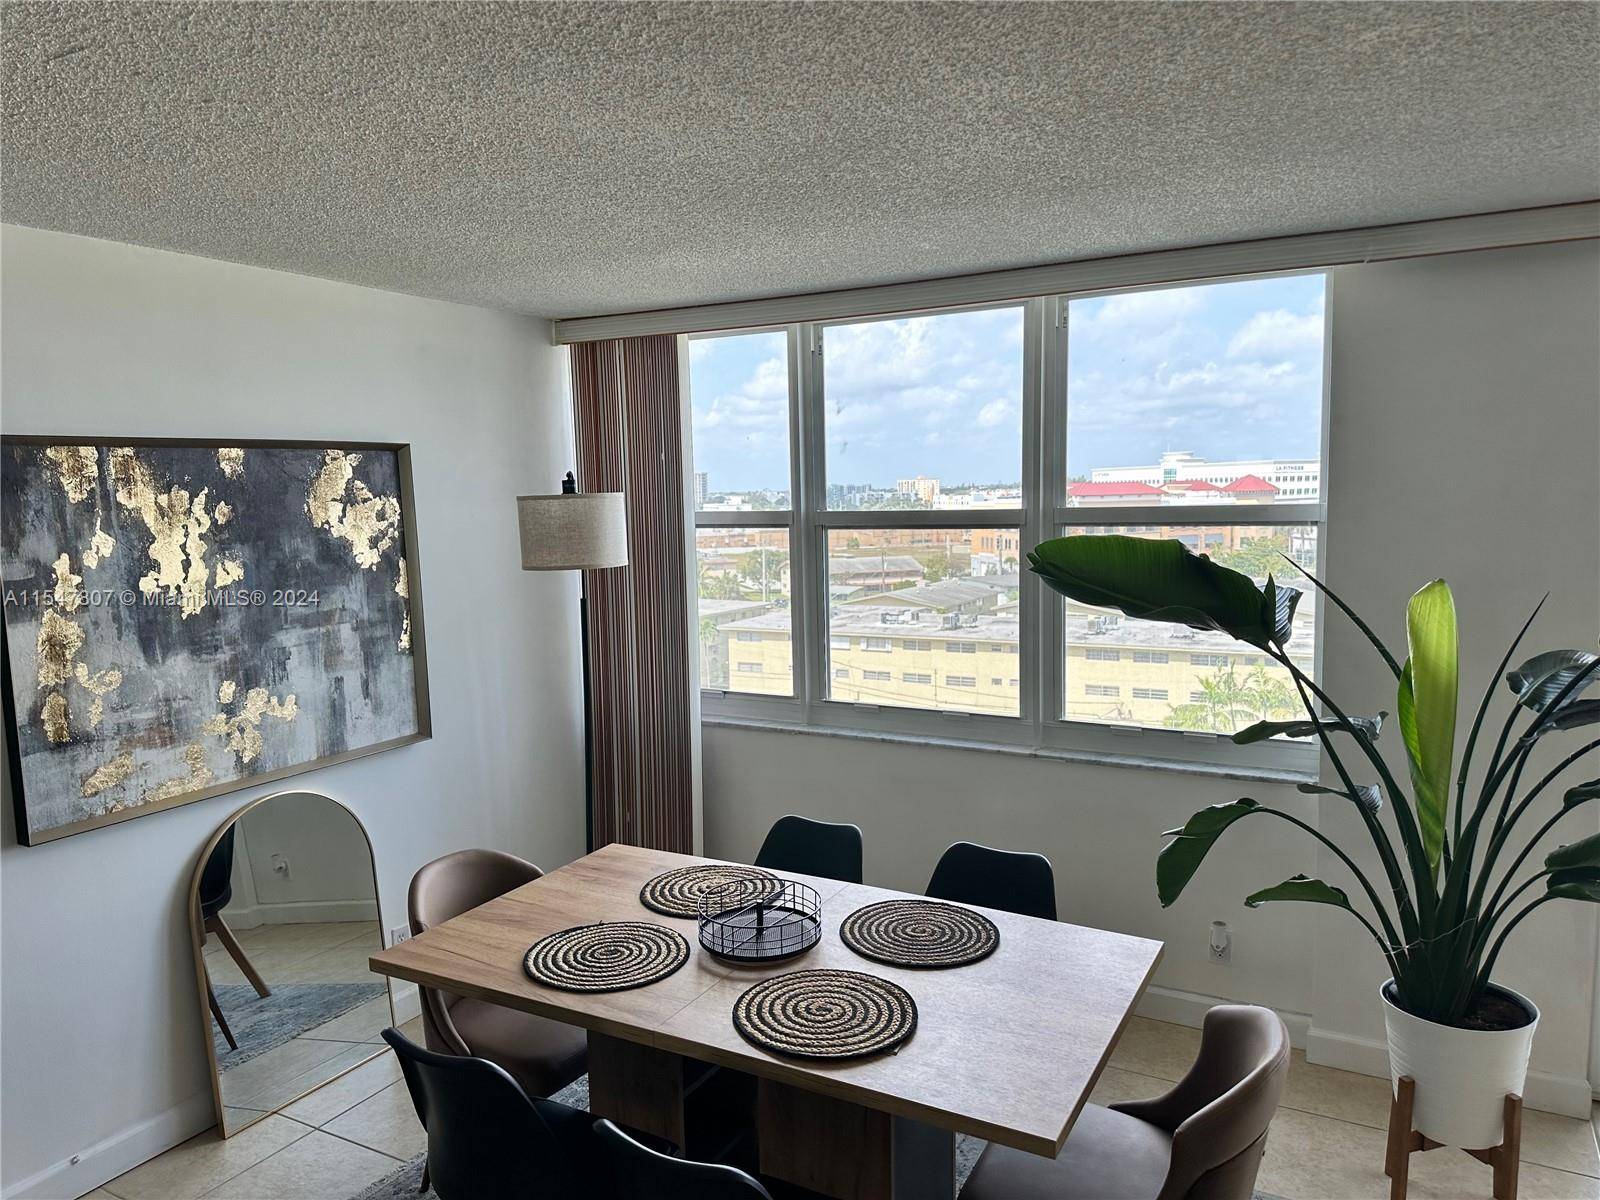 Bright and spacious 2BD 2BA corner condo unit at Bayview Towers with water views of the bay intracoastal waterway as well as city skyline views.